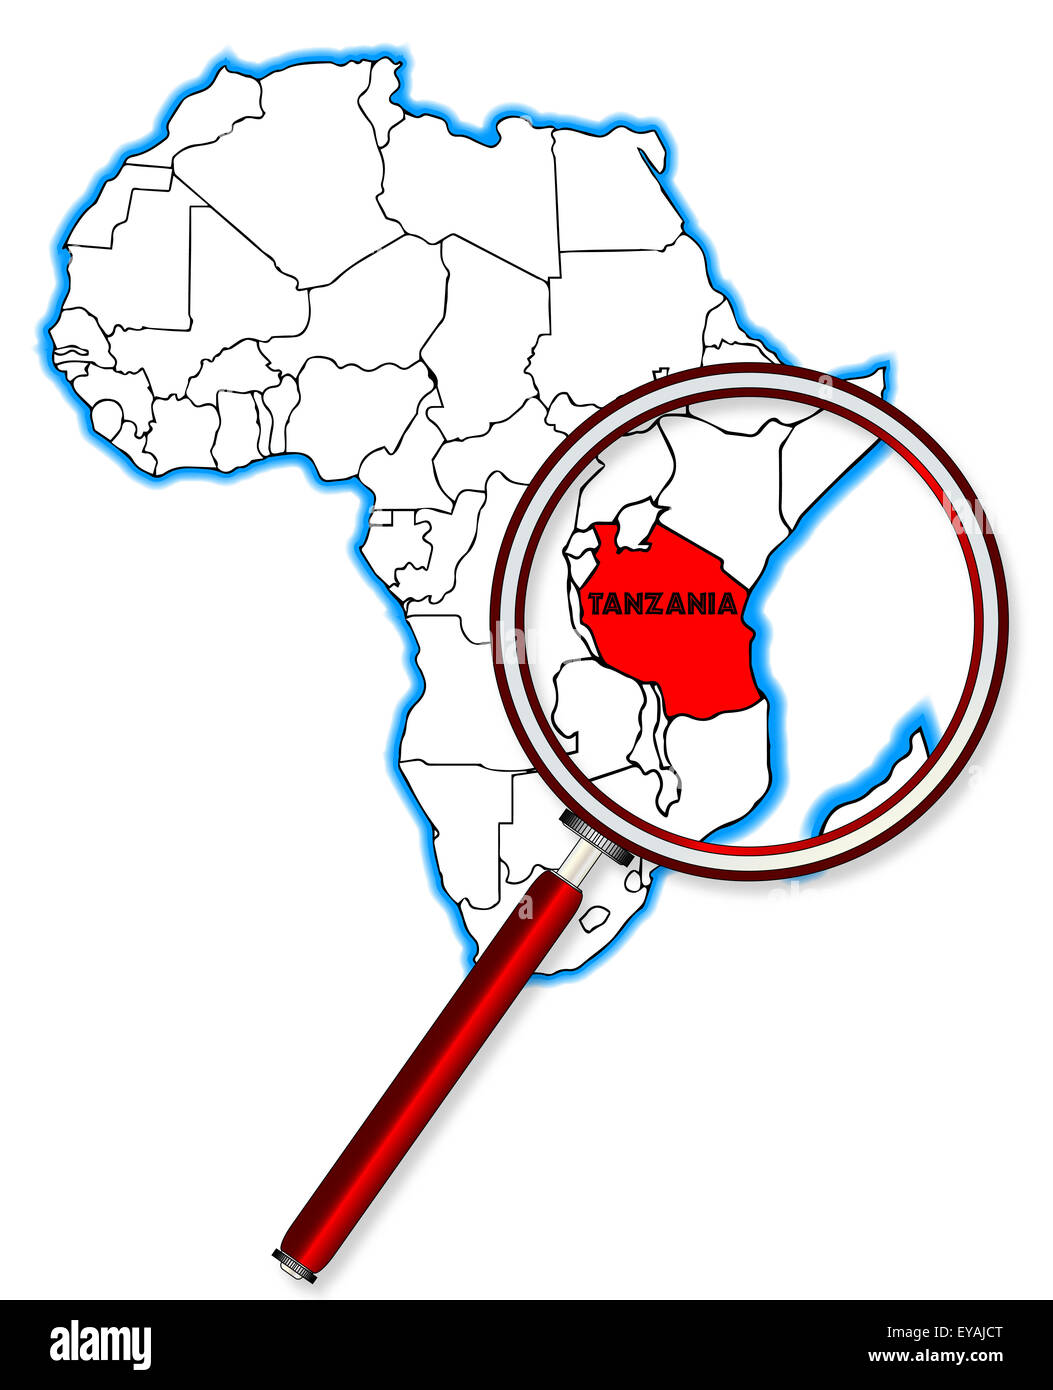 Tanzania outline inset into a map of Africa over a white background Stock Photo